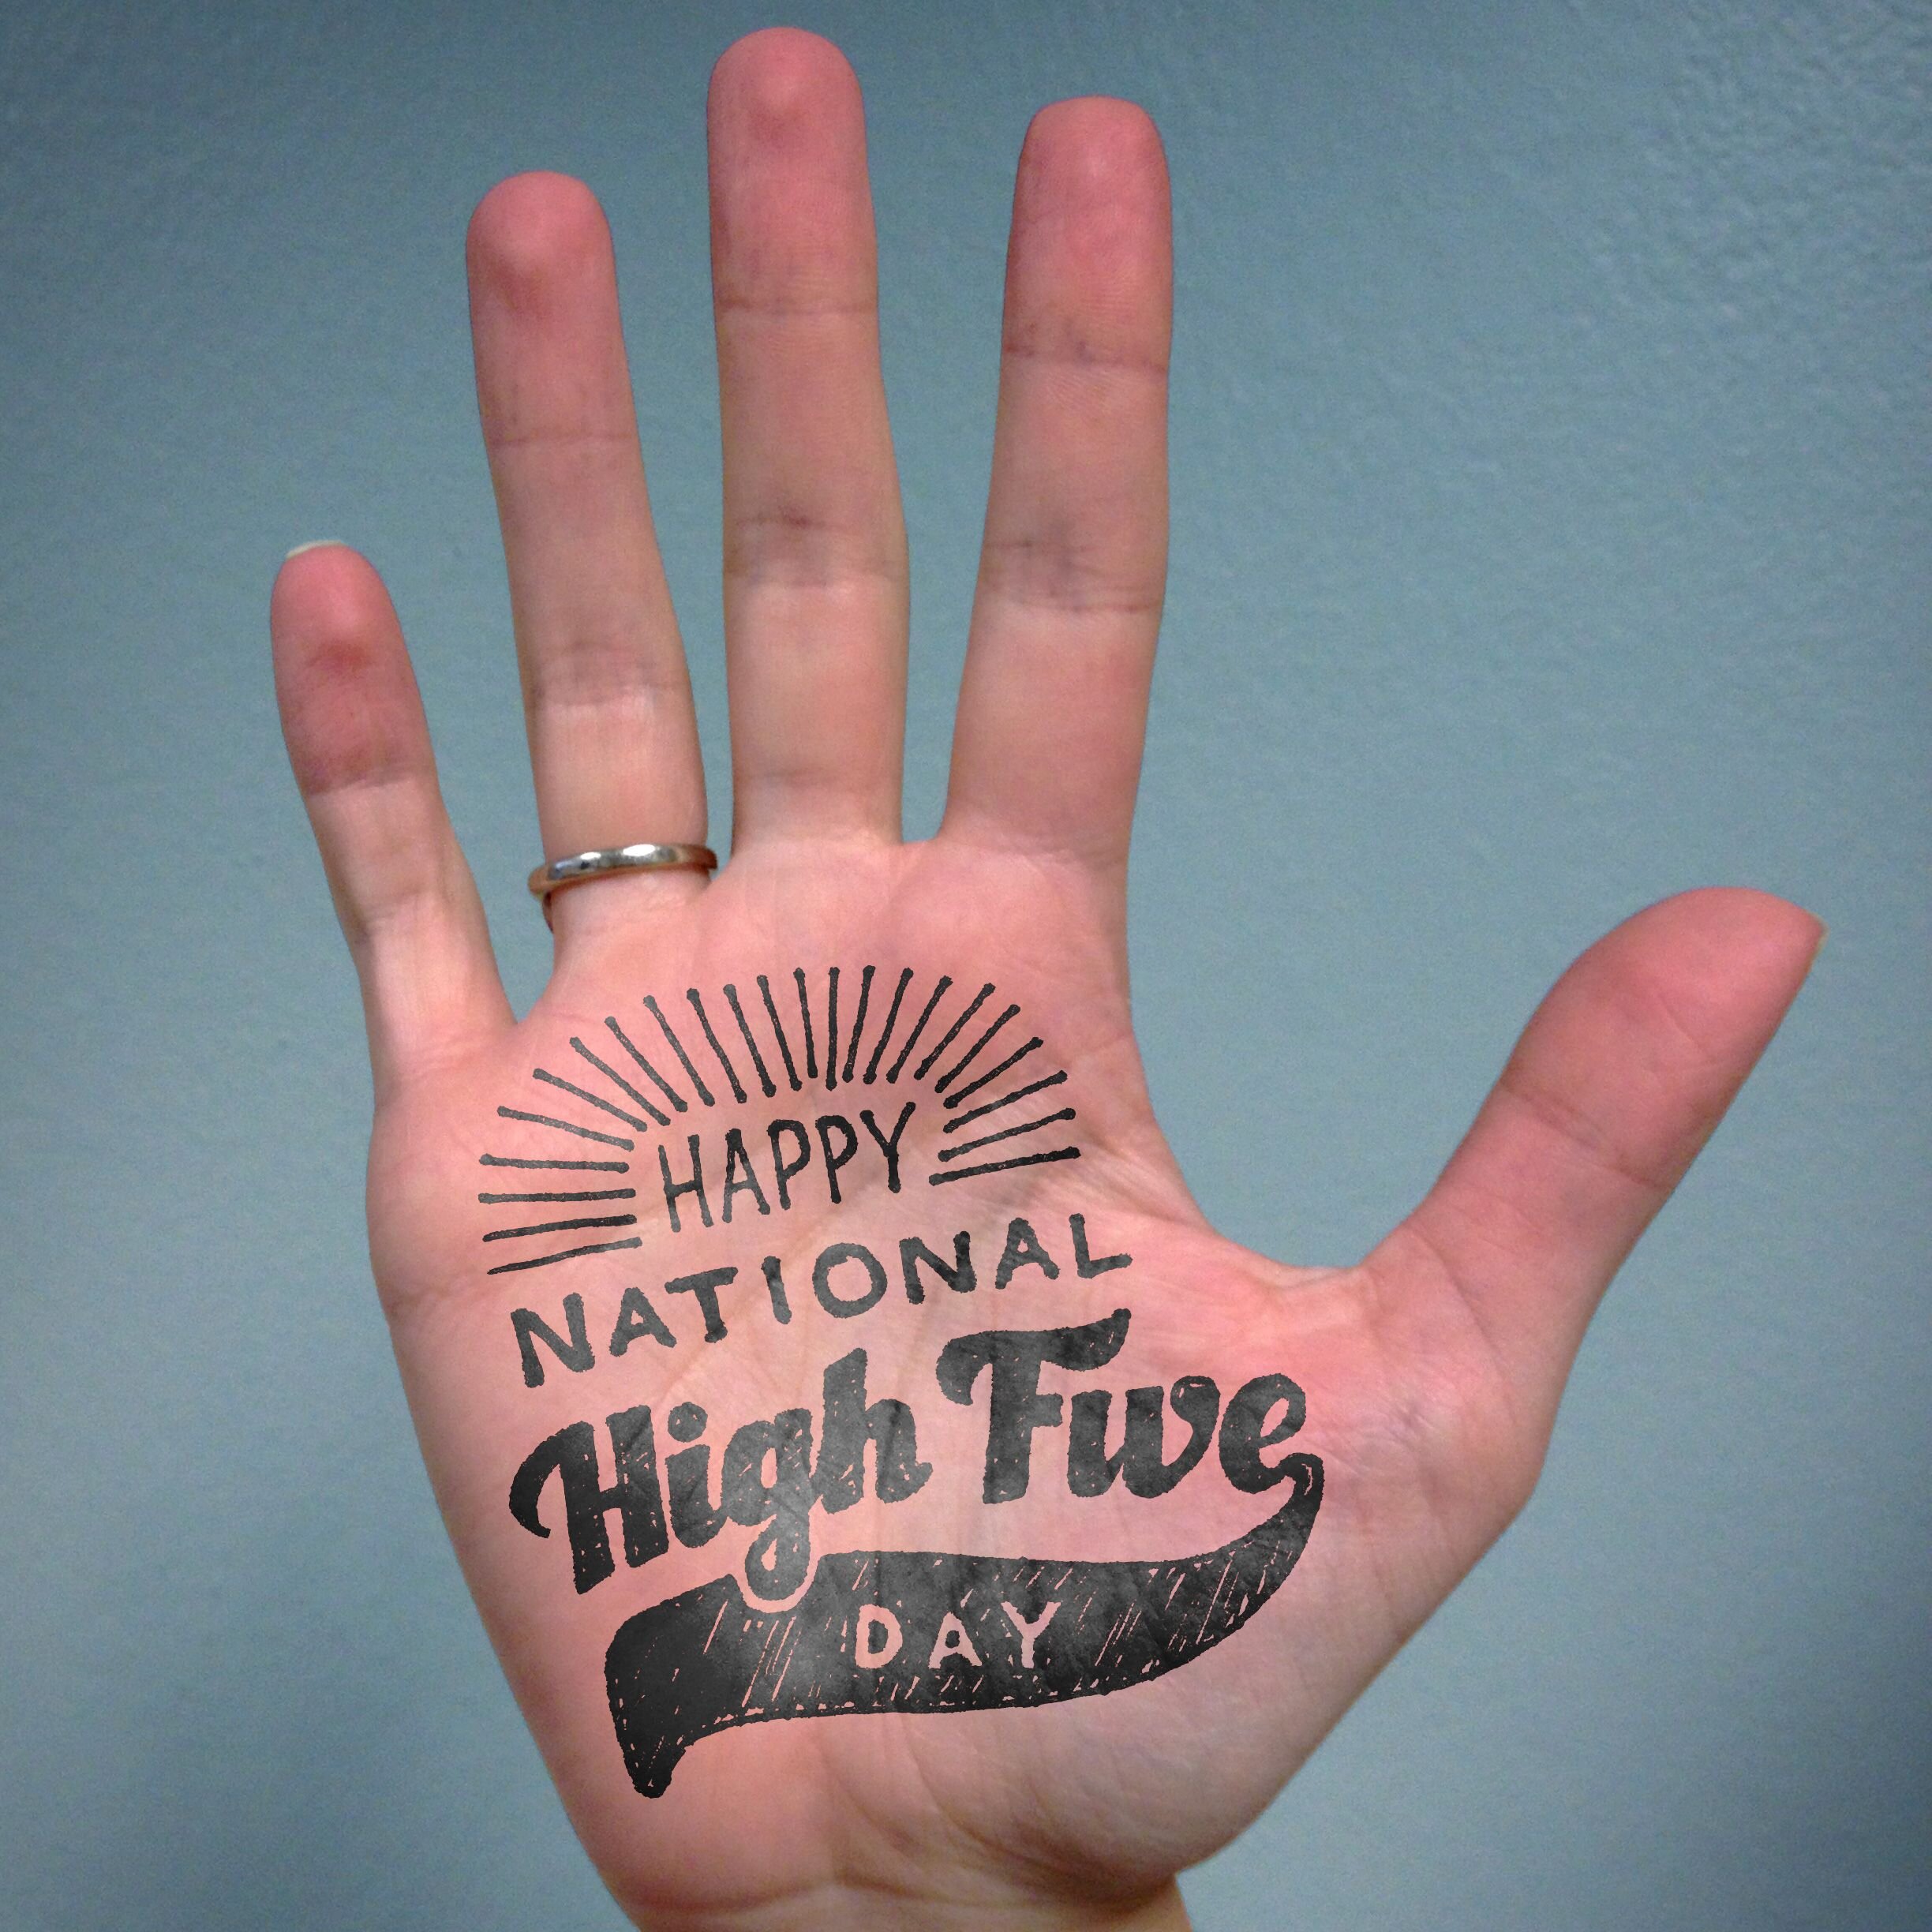 National High Five Day: What does it mean to dream about a high five?